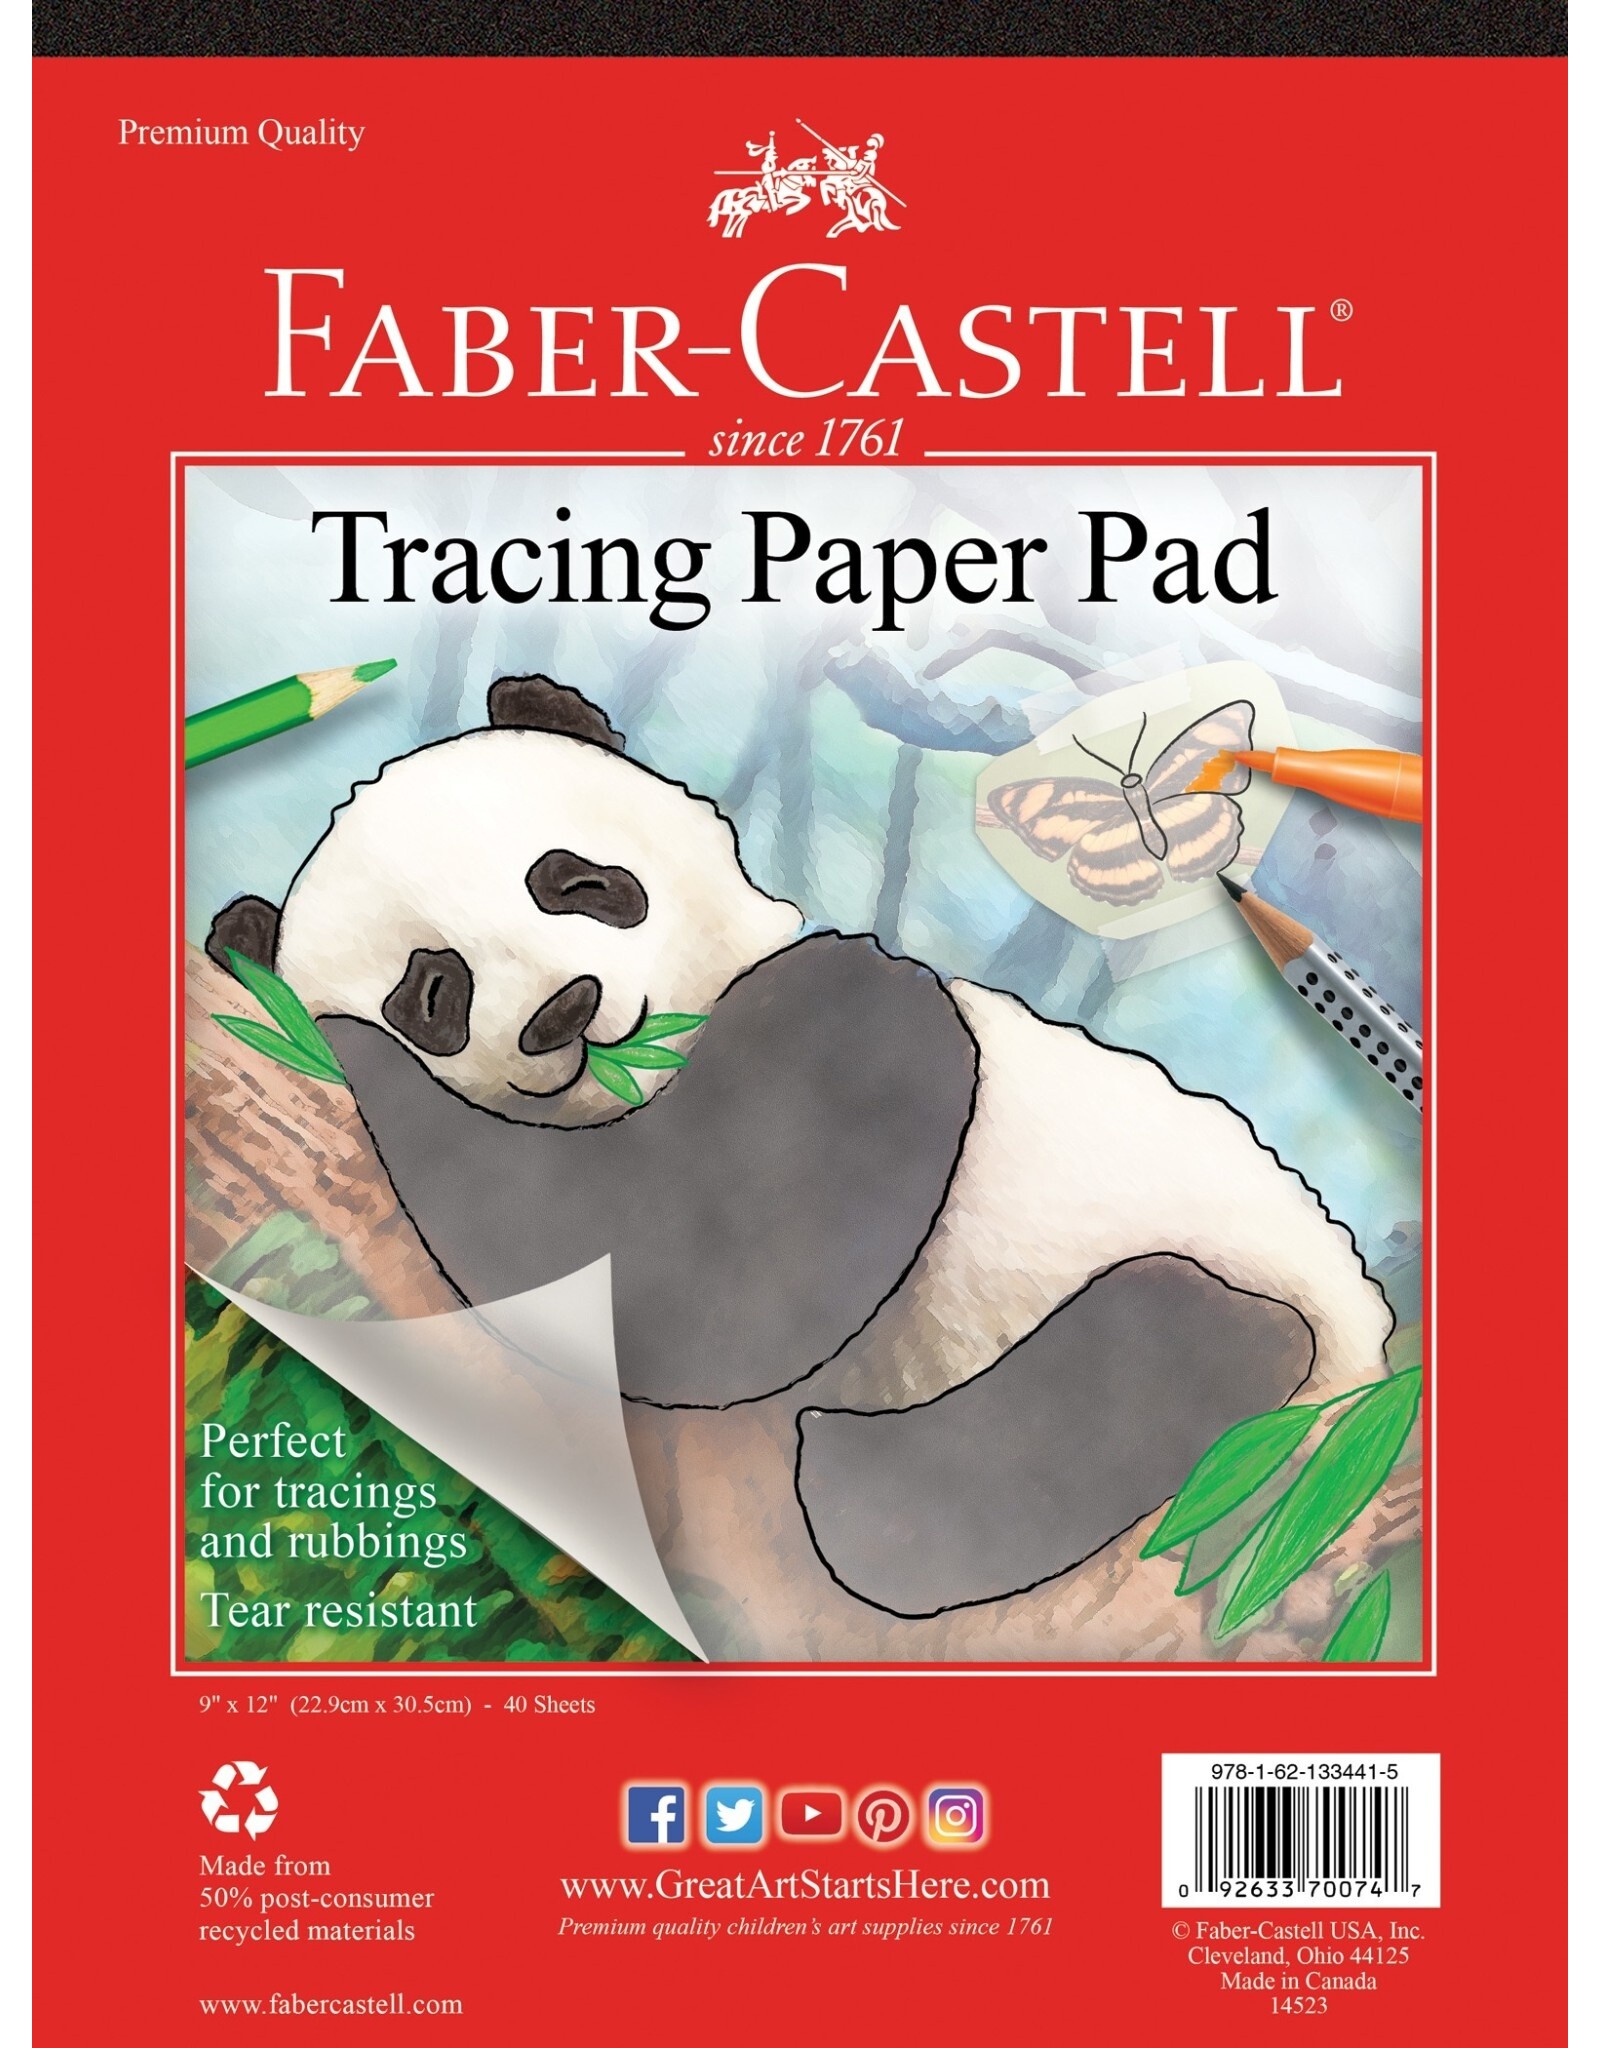 Faber-Castell Tracing Paper Pad 9"x12"